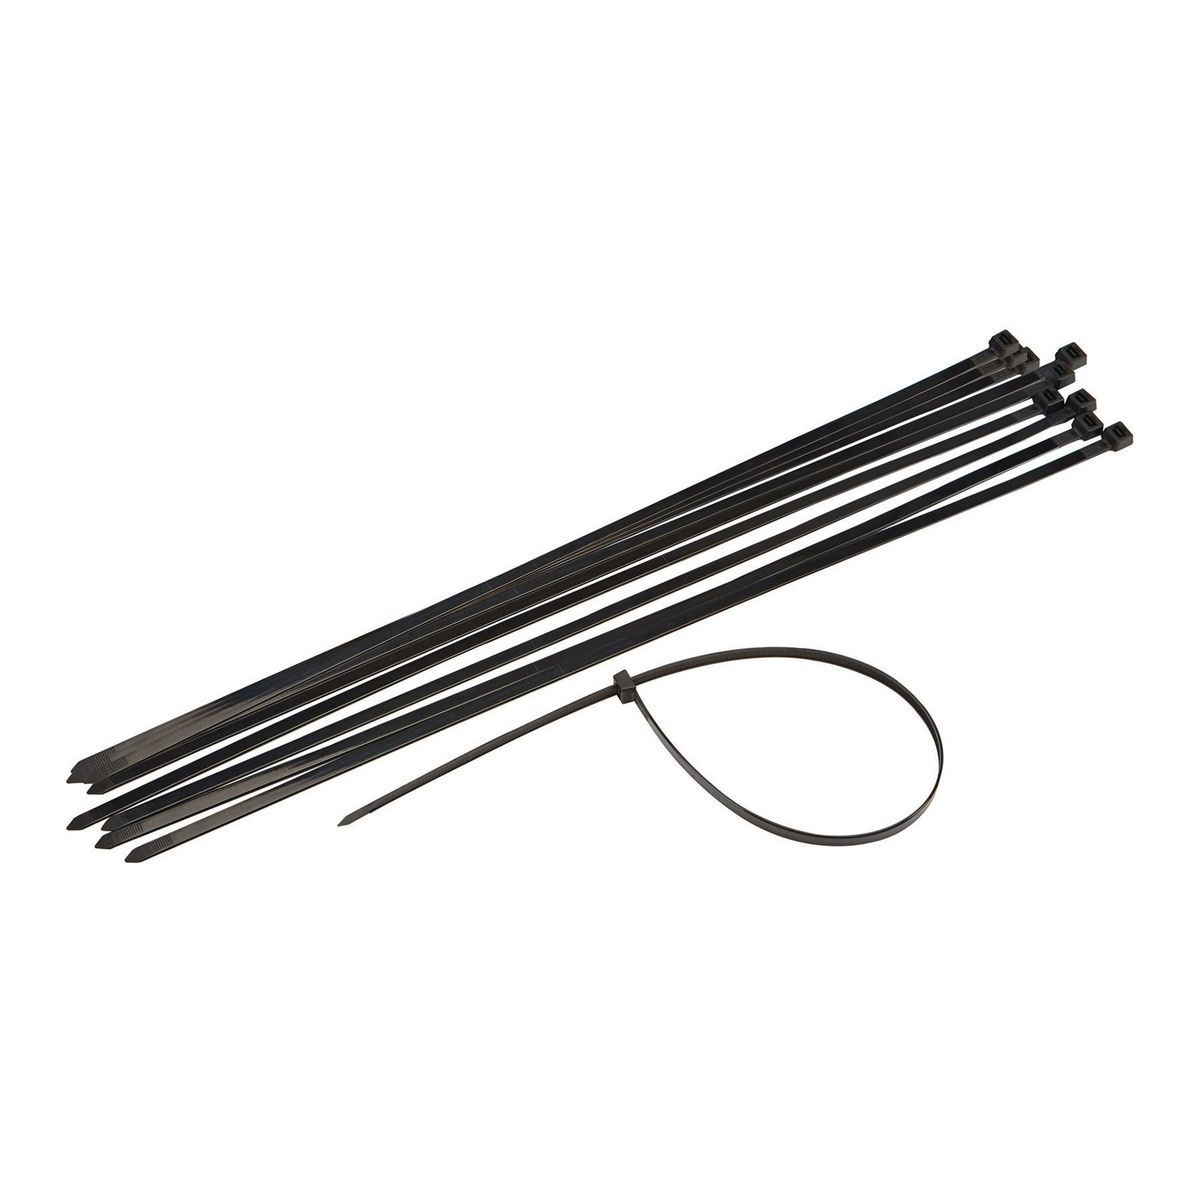 STOREHOUSE 24 in. Heavy Duty Cable Ties 10 Pk. - Item 62720 / 62717